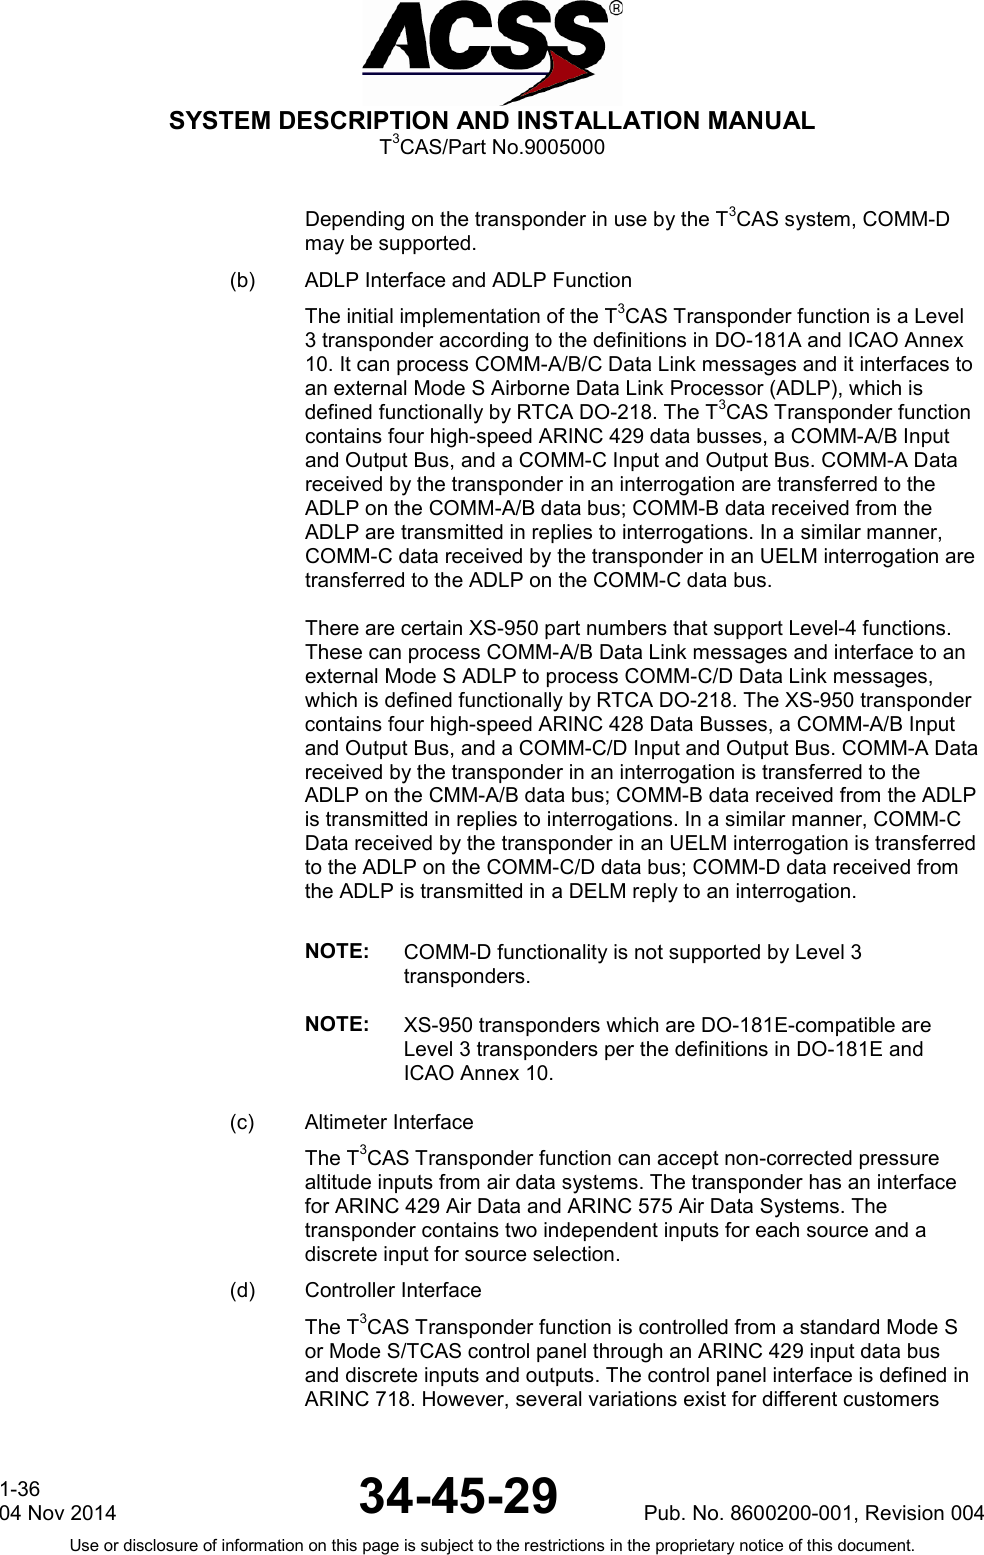  SYSTEM DESCRIPTION AND INSTALLATION MANUAL T3CAS/Part No.9005000  Depending on the transponder in use by the T3CAS system, COMM-D may be supported. (b) ADLP Interface and ADLP Function The initial implementation of the T3CAS Transponder function is a Level 3 transponder according to the definitions in DO-181A and ICAO Annex 10. It can process COMM-A/B/C Data Link messages and it interfaces to an external Mode S Airborne Data Link Processor (ADLP), which is defined functionally by RTCA DO-218. The T3CAS Transponder function contains four high-speed ARINC 429 data busses, a COMM-A/B Input and Output Bus, and a COMM-C Input and Output Bus. COMM-A Data received by the transponder in an interrogation are transferred to the ADLP on the COMM-A/B data bus; COMM-B data received from the ADLP are transmitted in replies to interrogations. In a similar manner, COMM-C data received by the transponder in an UELM interrogation are transferred to the ADLP on the COMM-C data bus.  There are certain XS-950 part numbers that support Level-4 functions. These can process COMM-A/B Data Link messages and interface to an external Mode S ADLP to process COMM-C/D Data Link messages, which is defined functionally by RTCA DO-218. The XS-950 transponder contains four high-speed ARINC 428 Data Busses, a COMM-A/B Input and Output Bus, and a COMM-C/D Input and Output Bus. COMM-A Data received by the transponder in an interrogation is transferred to the ADLP on the CMM-A/B data bus; COMM-B data received from the ADLP is transmitted in replies to interrogations. In a similar manner, COMM-C Data received by the transponder in an UELM interrogation is transferred to the ADLP on the COMM-C/D data bus; COMM-D data received from the ADLP is transmitted in a DELM reply to an interrogation.  NOTE: COMM-D functionality is not supported by Level 3 transponders. NOTE: XS-950 transponders which are DO-181E-compatible are Level 3 transponders per the definitions in DO-181E and ICAO Annex 10. (c) Altimeter Interface The T3CAS Transponder function can accept non-corrected pressure altitude inputs from air data systems. The transponder has an interface for ARINC 429 Air Data and ARINC 575 Air Data Systems. The transponder contains two independent inputs for each source and a discrete input for source selection. (d) Controller Interface The T3CAS Transponder function is controlled from a standard Mode S or Mode S/TCAS control panel through an ARINC 429 input data bus and discrete inputs and outputs. The control panel interface is defined in ARINC 718. However, several variations exist for different customers 1-36 04 Nov 2014 34-45-29 Pub. No. 8600200-001, Revision 004 Use or disclosure of information on this page is subject to the restrictions in the proprietary notice of this document.  